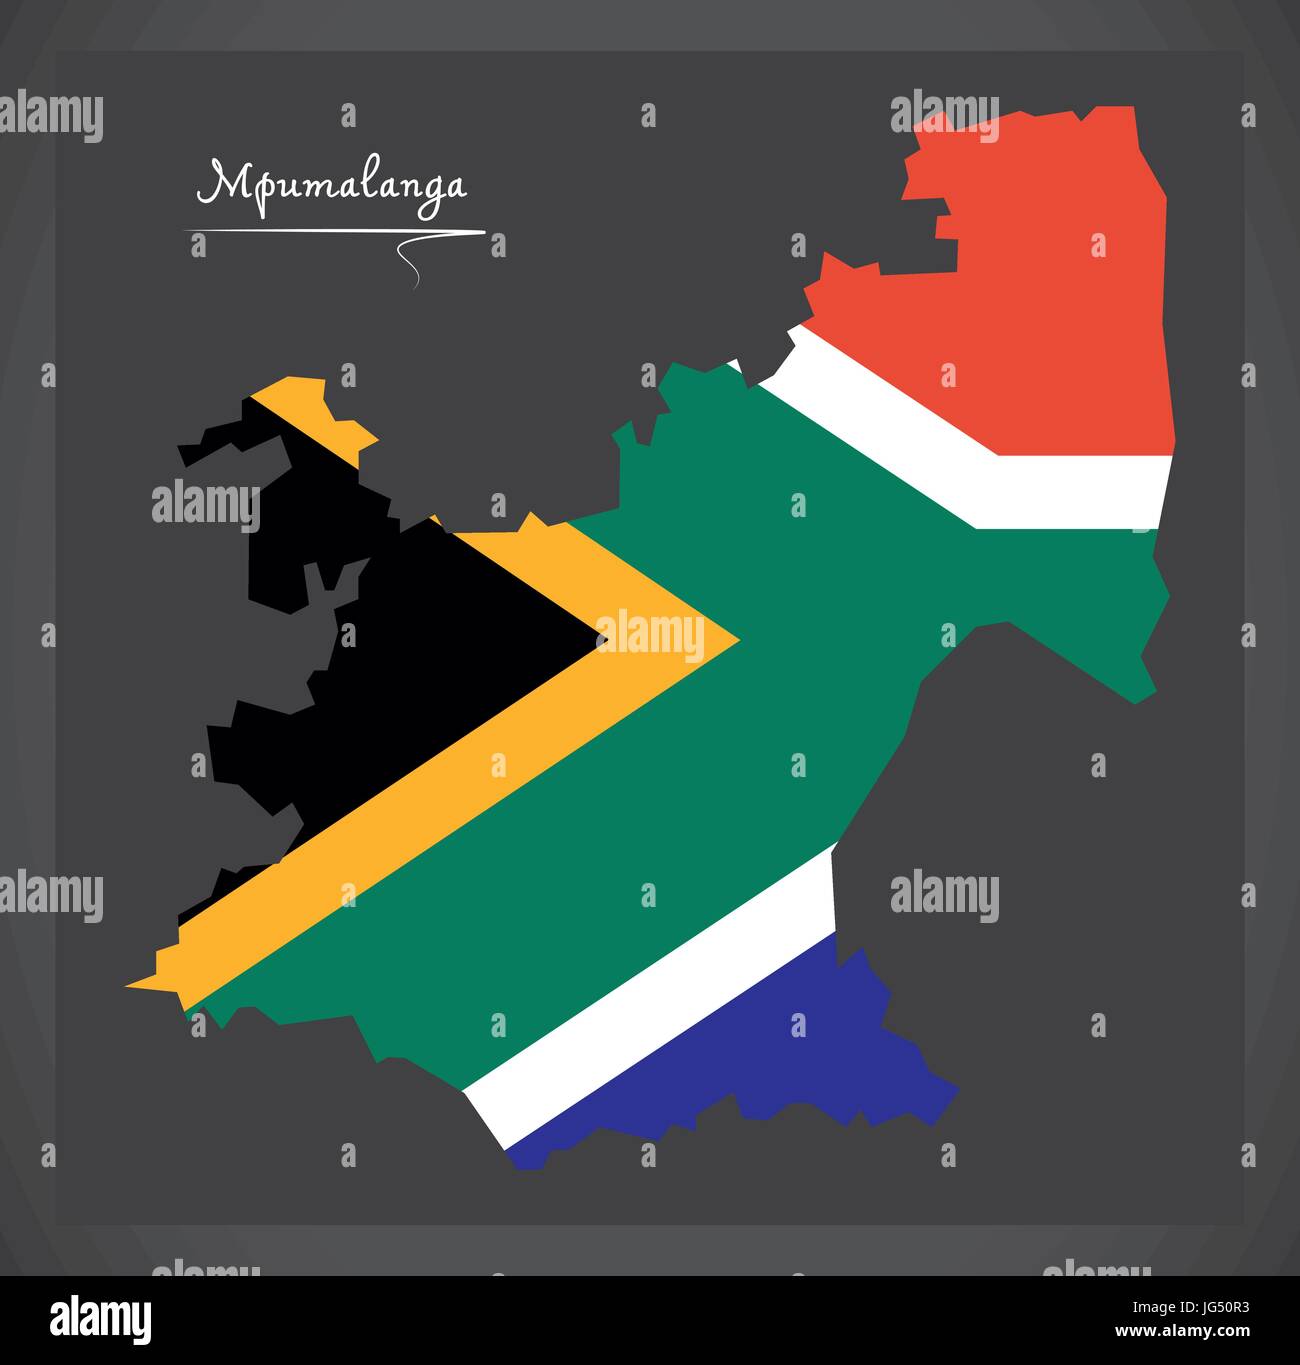 Mpumalanga South Africa map with national flag illustration Stock Vector